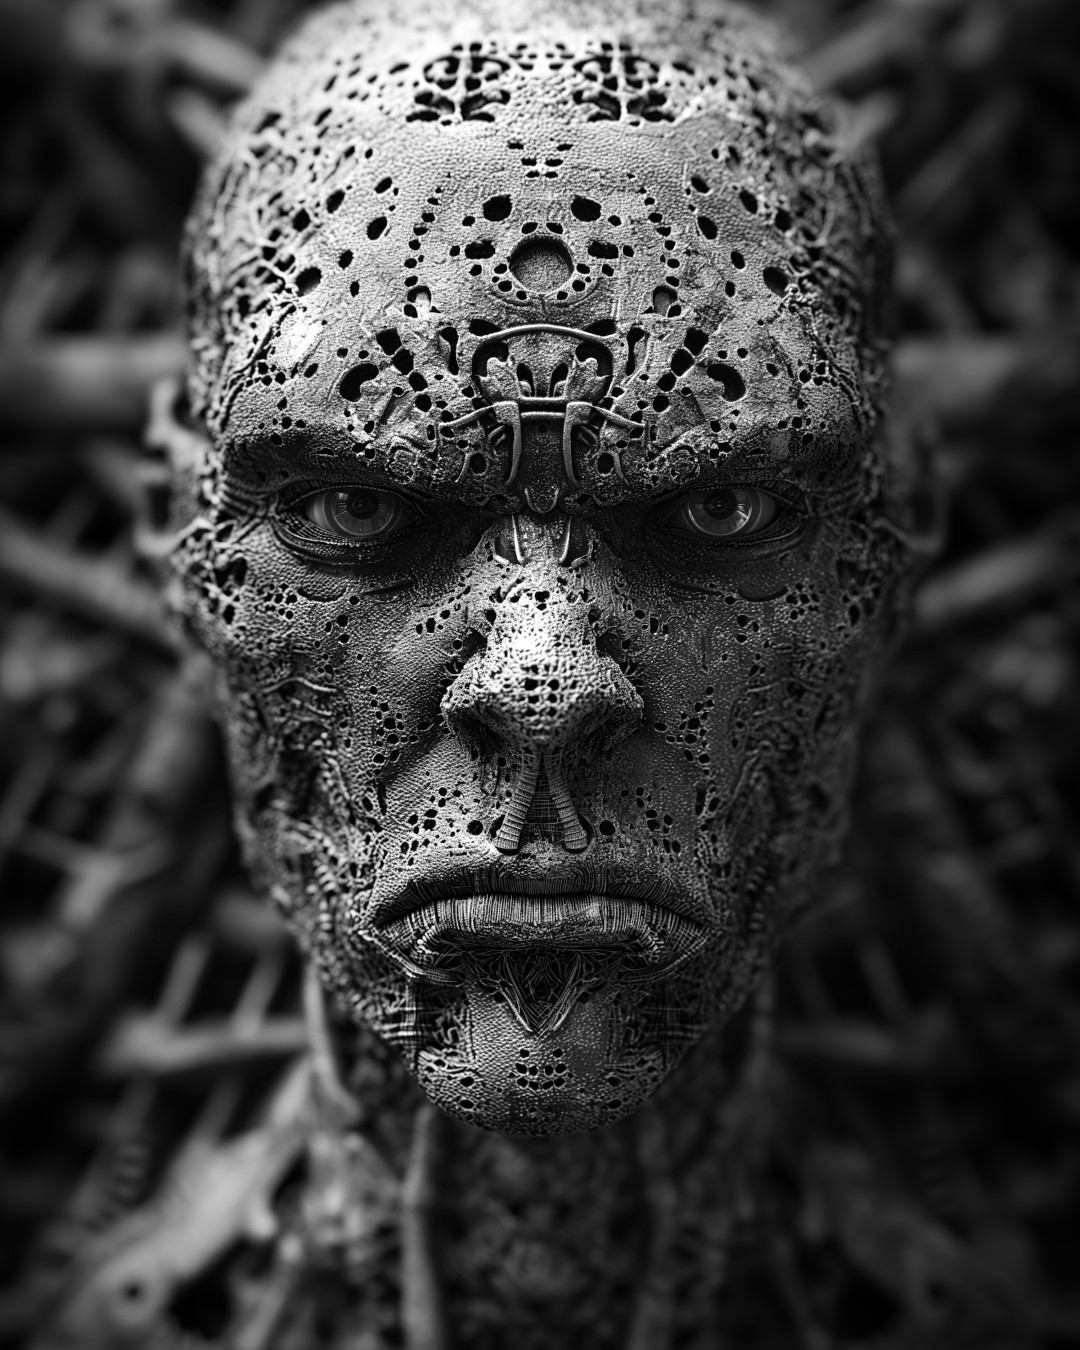 Metallic head, detailed and intricate composition, gothic dark intensity